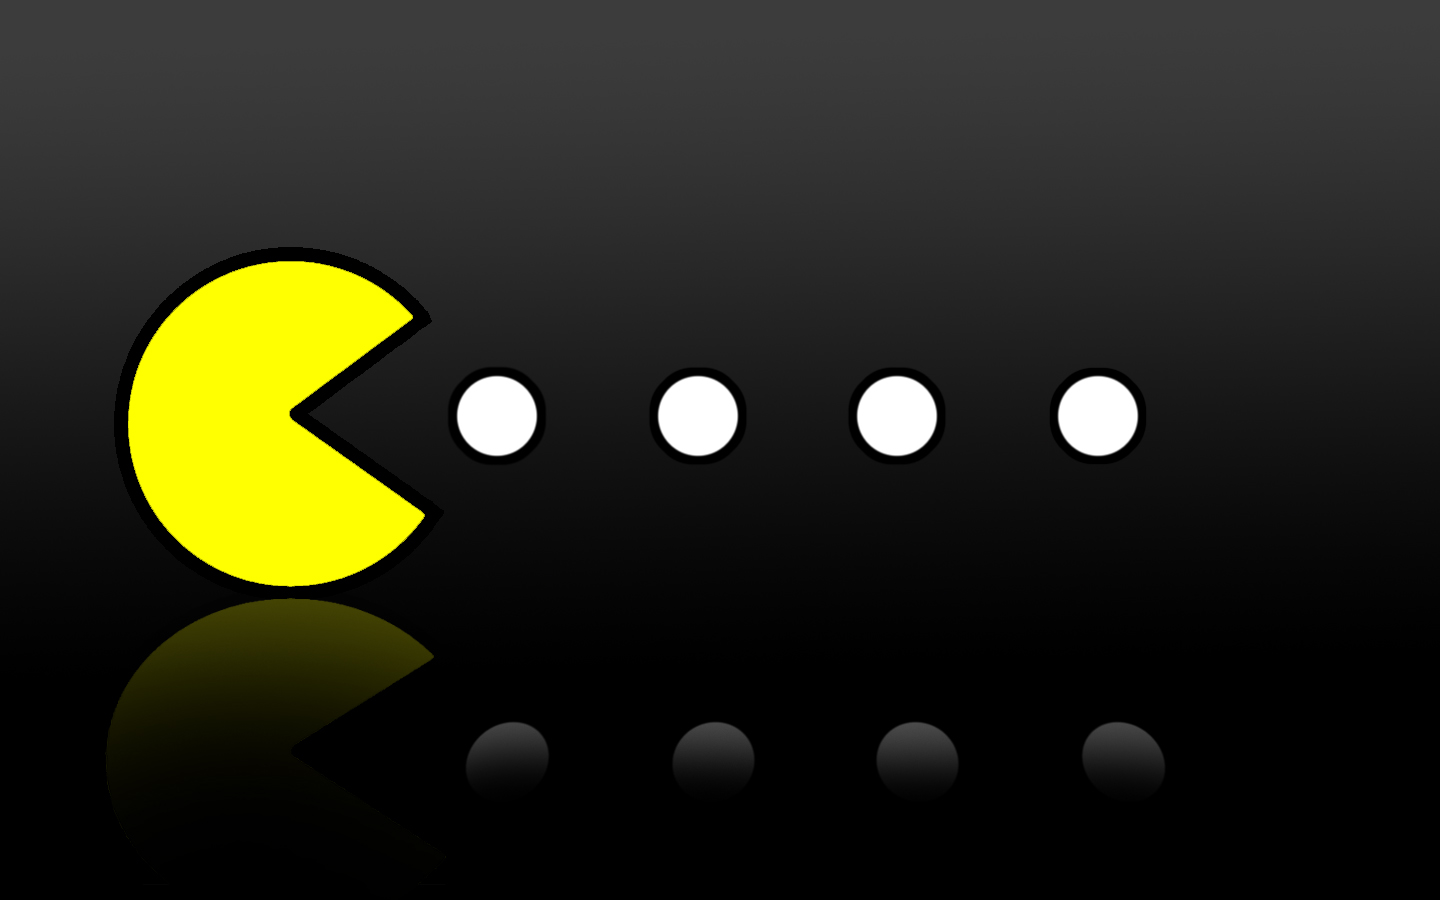 pacman reflection wallpaper background classic game arcade img image